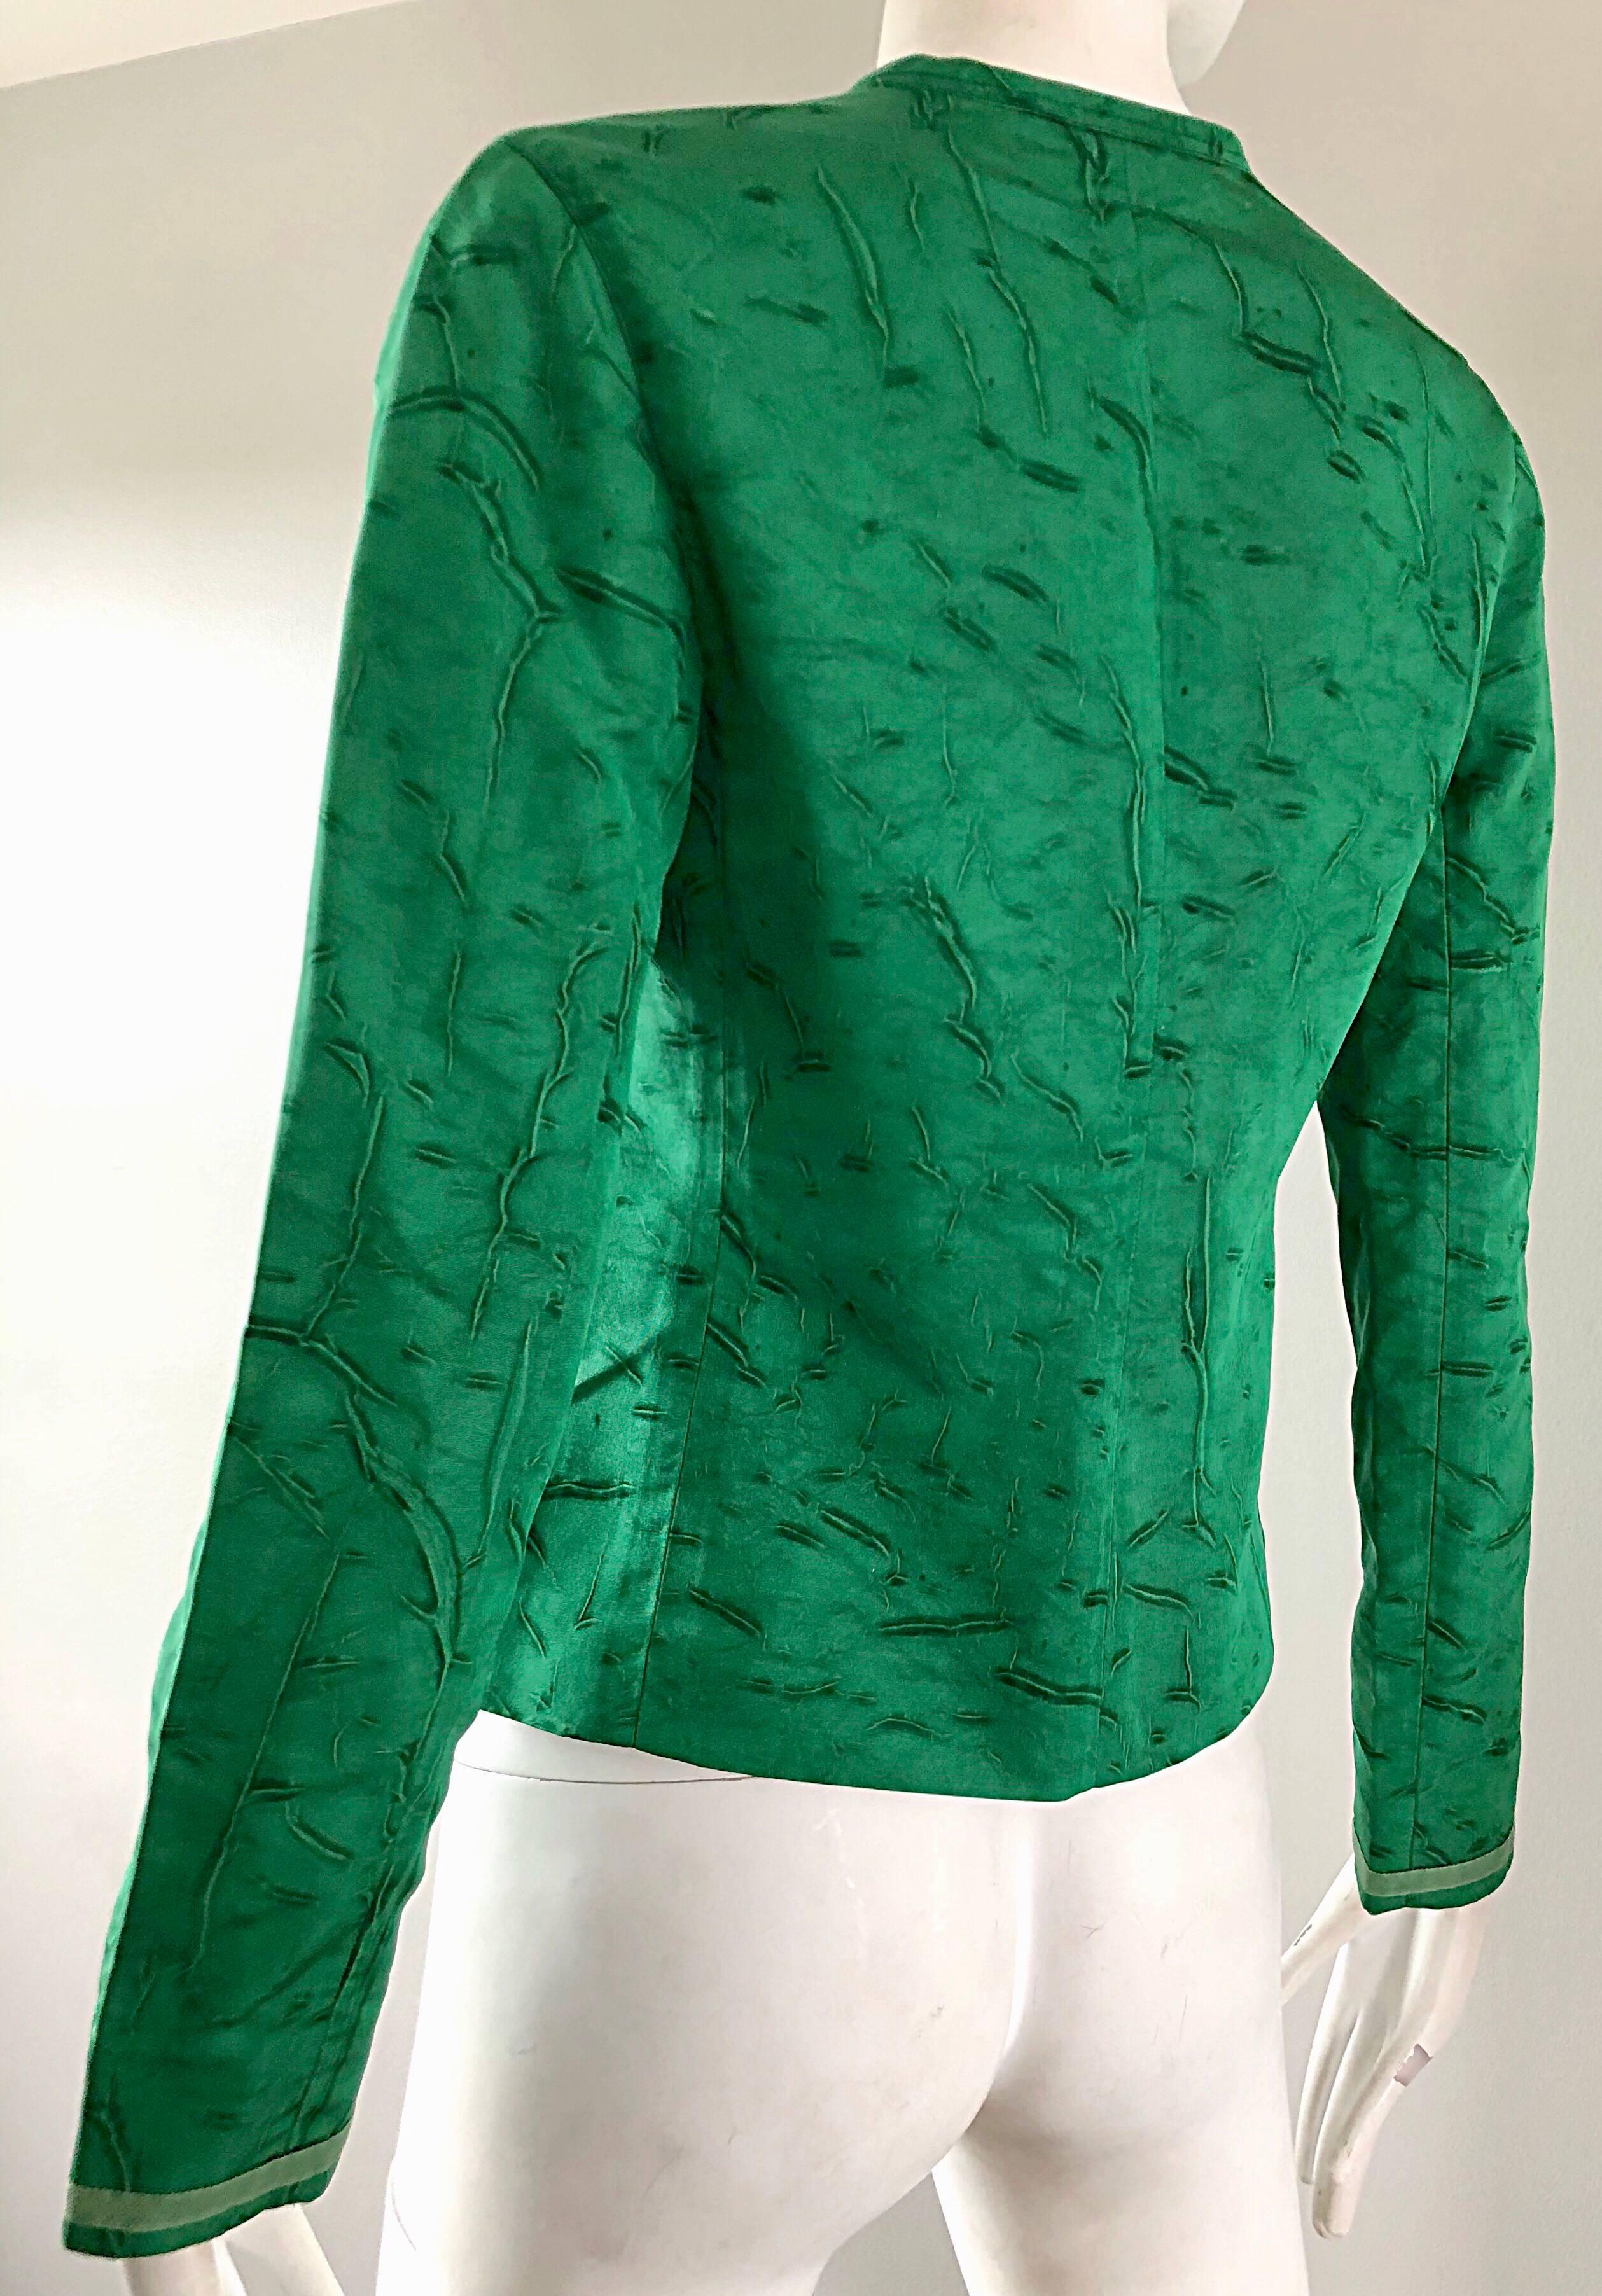 Prada 1990s Kelly Green Tie Dyed Vintage 90s Does 60s Pillbox Jacket w/ Pockets  In Excellent Condition For Sale In San Diego, CA